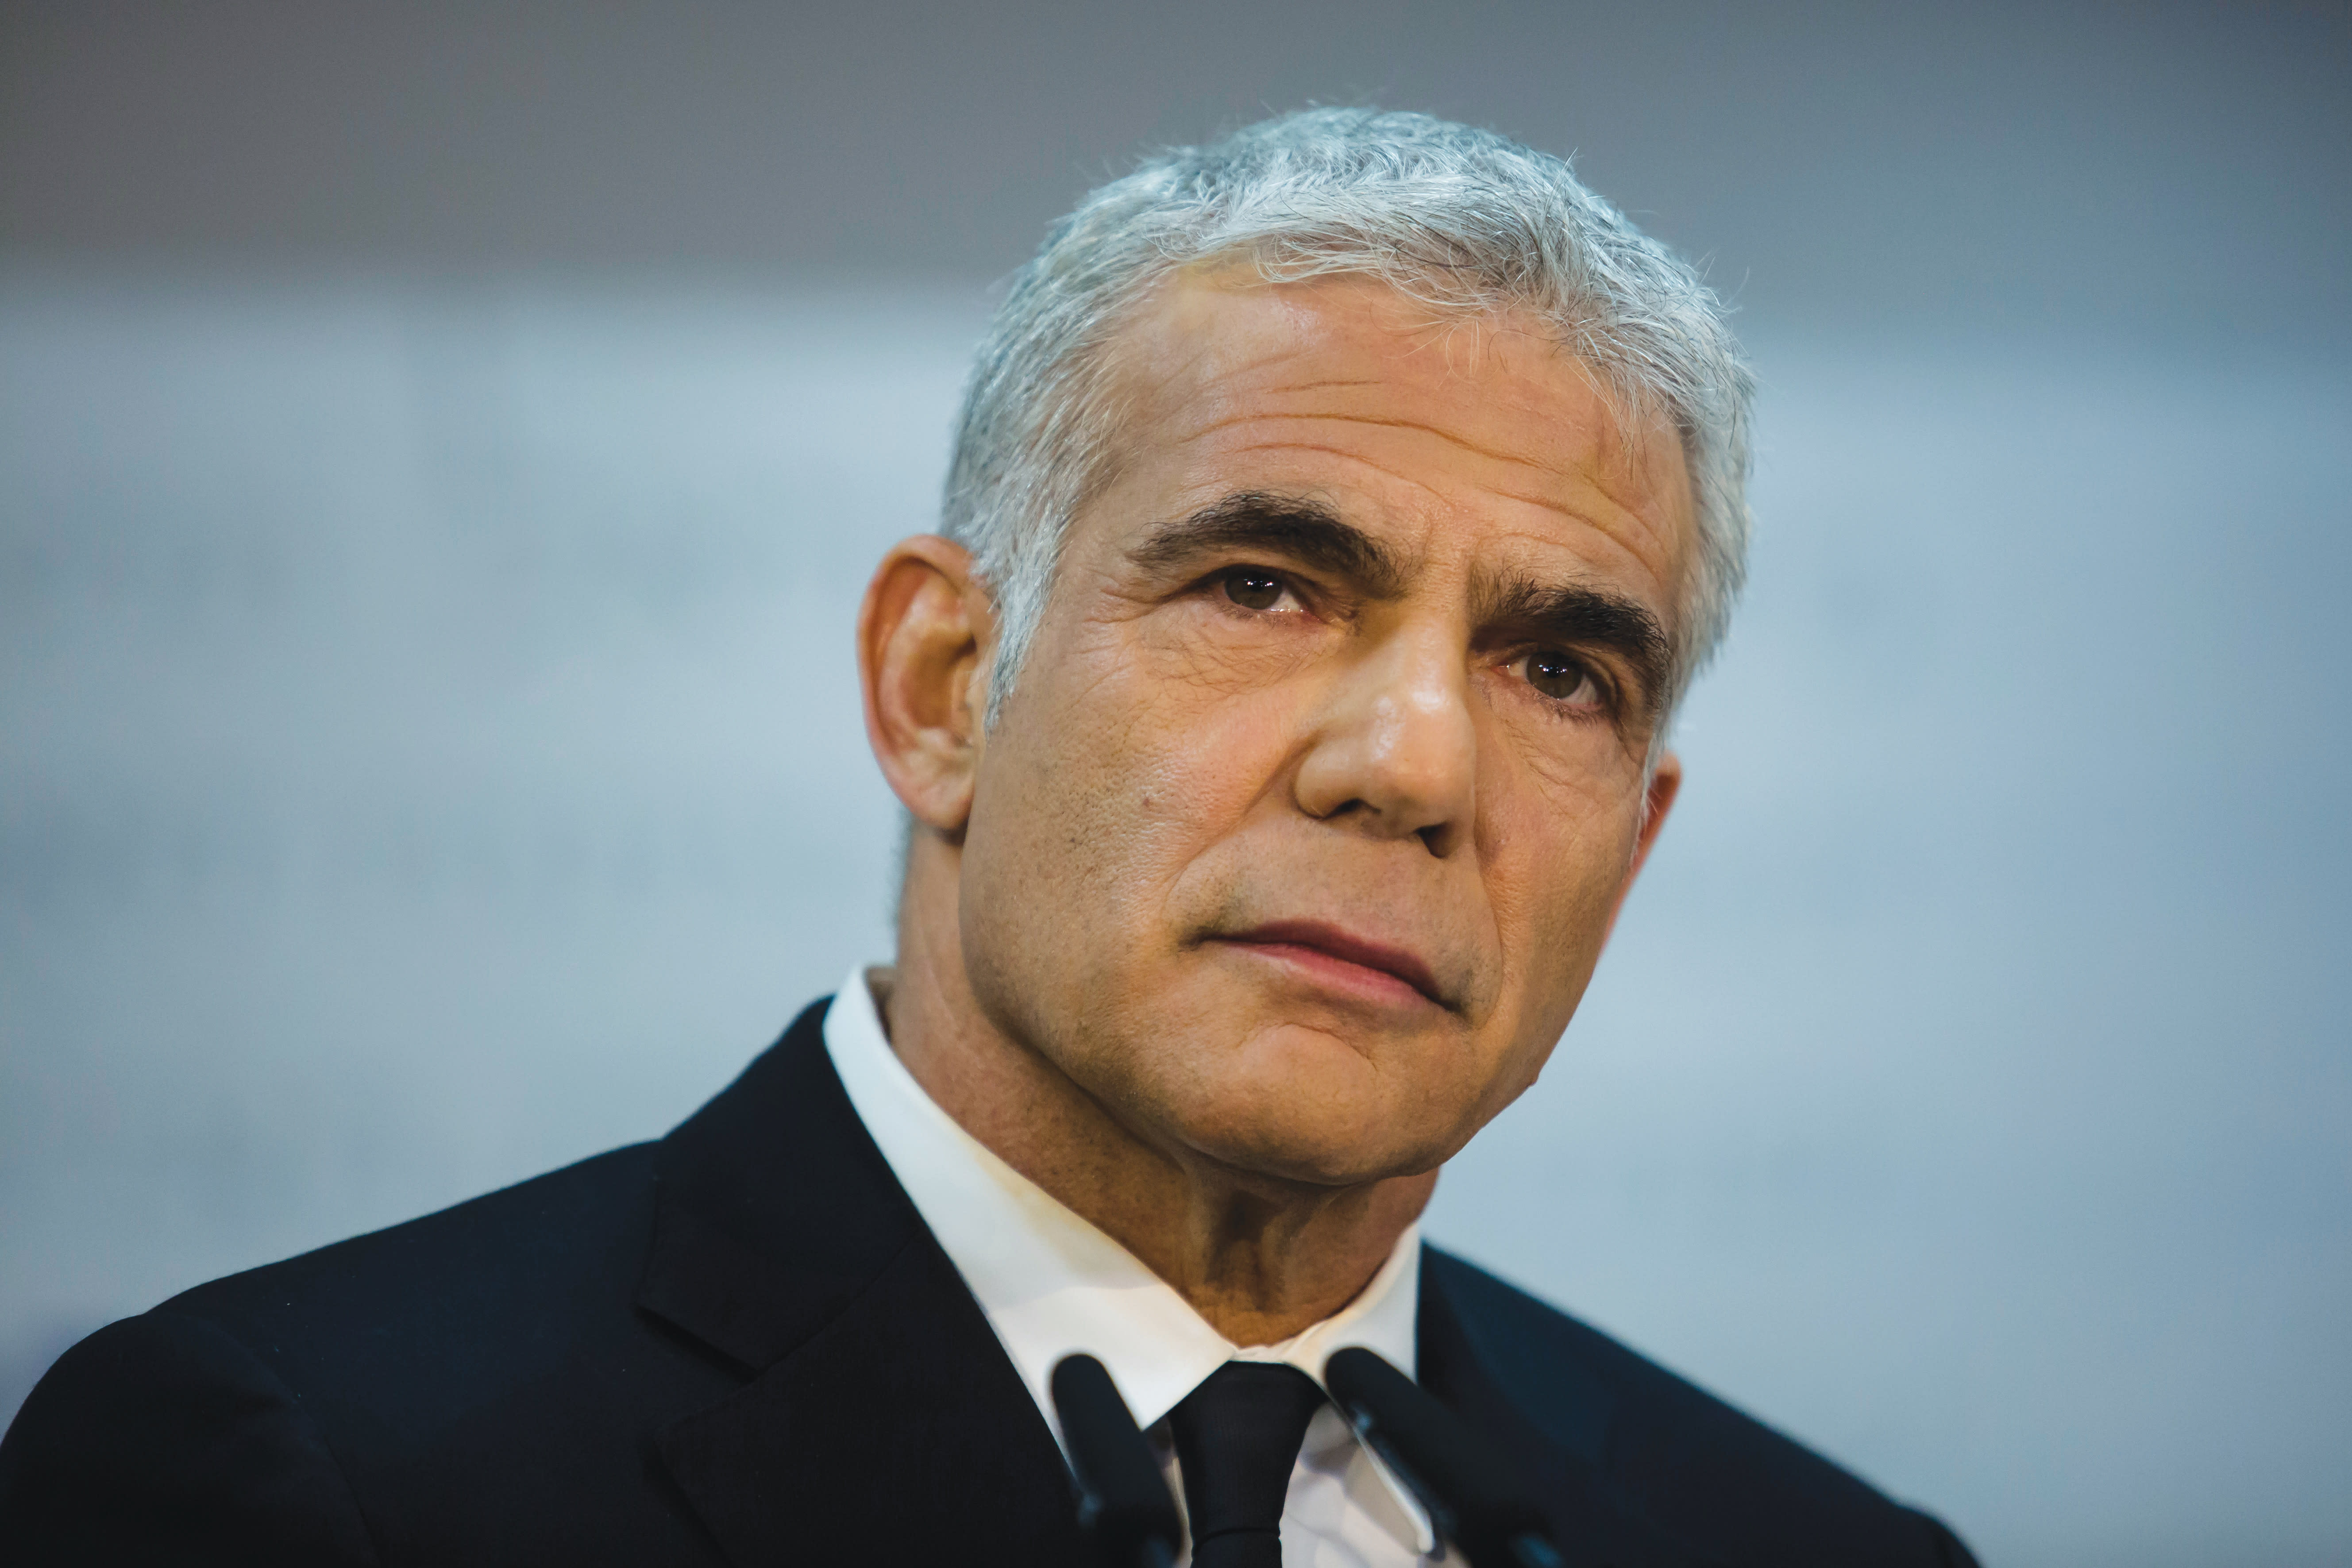  Yesh Atid leader, Israeli Prime Minister Yair Lapid (credit: Amir Levy/Getty Images)